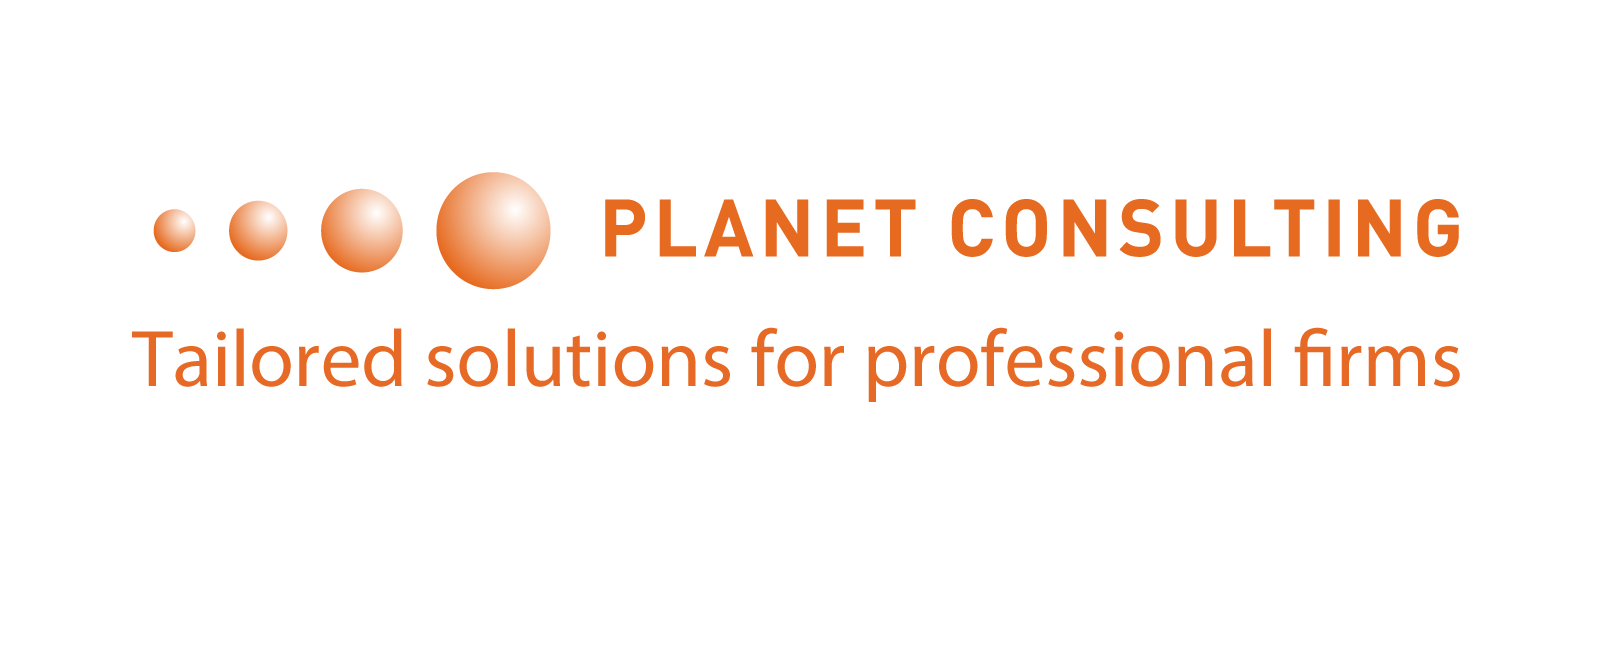 Planet Consulting Logo 2016_03_21 - Planet Consulting.png